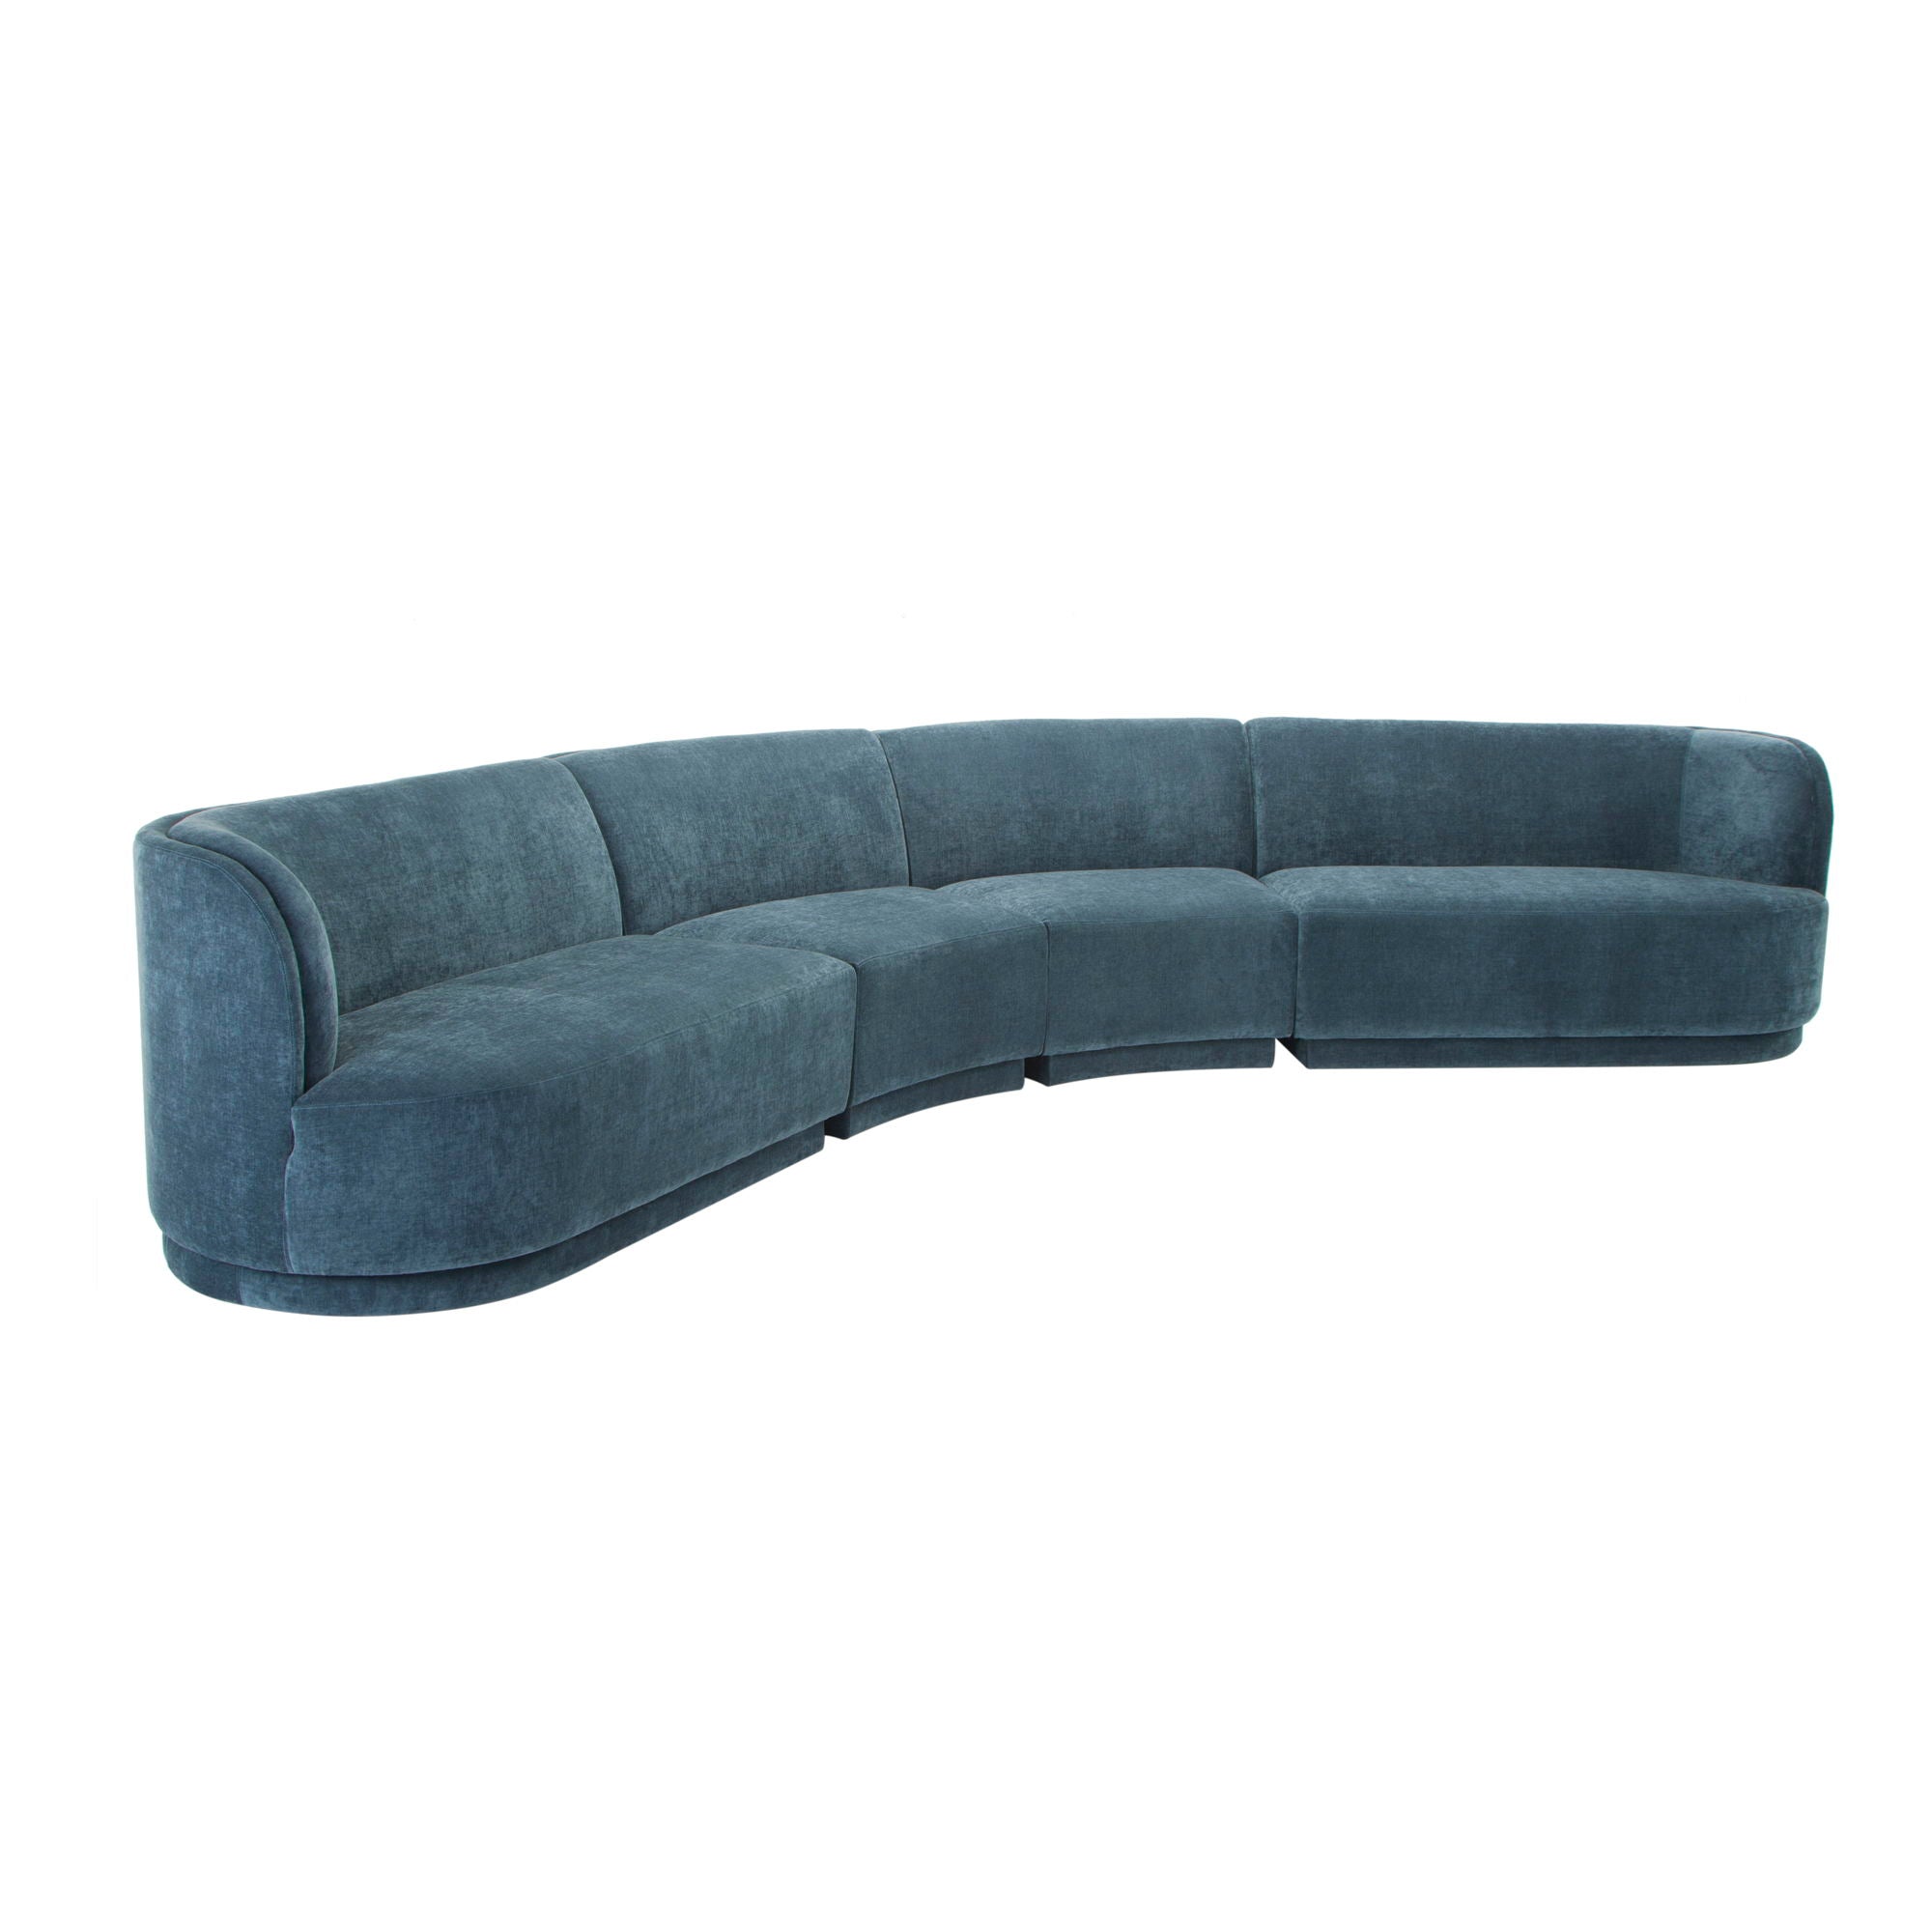 Yoon - Eclipse Modular Sectional Right-Facing Chaise - Blue